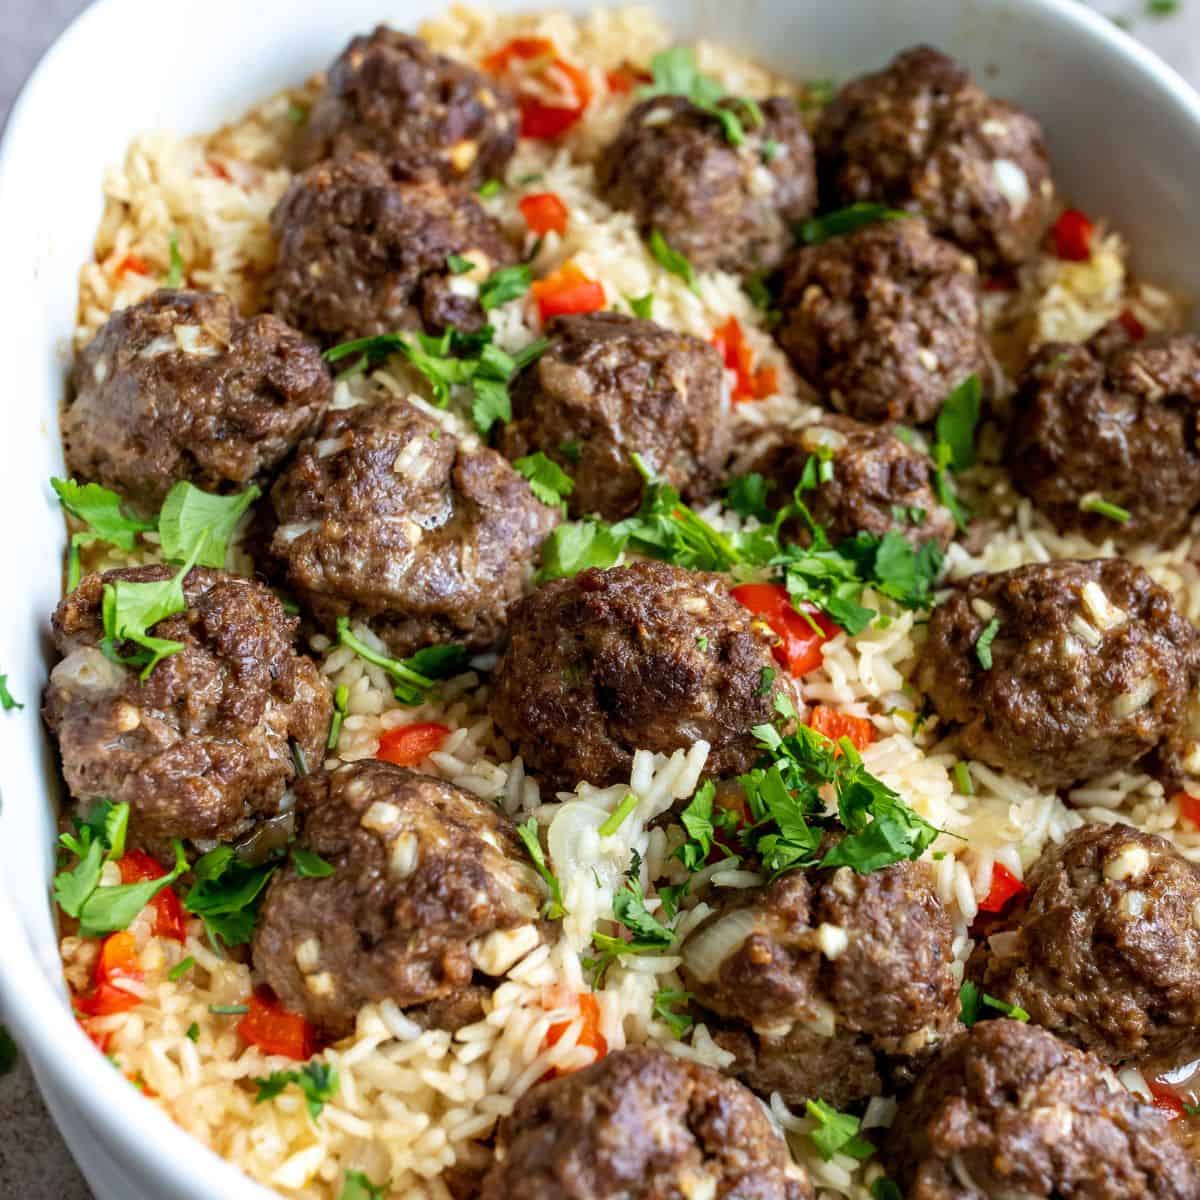 Meatballs up close in rice and in a casserole dish.